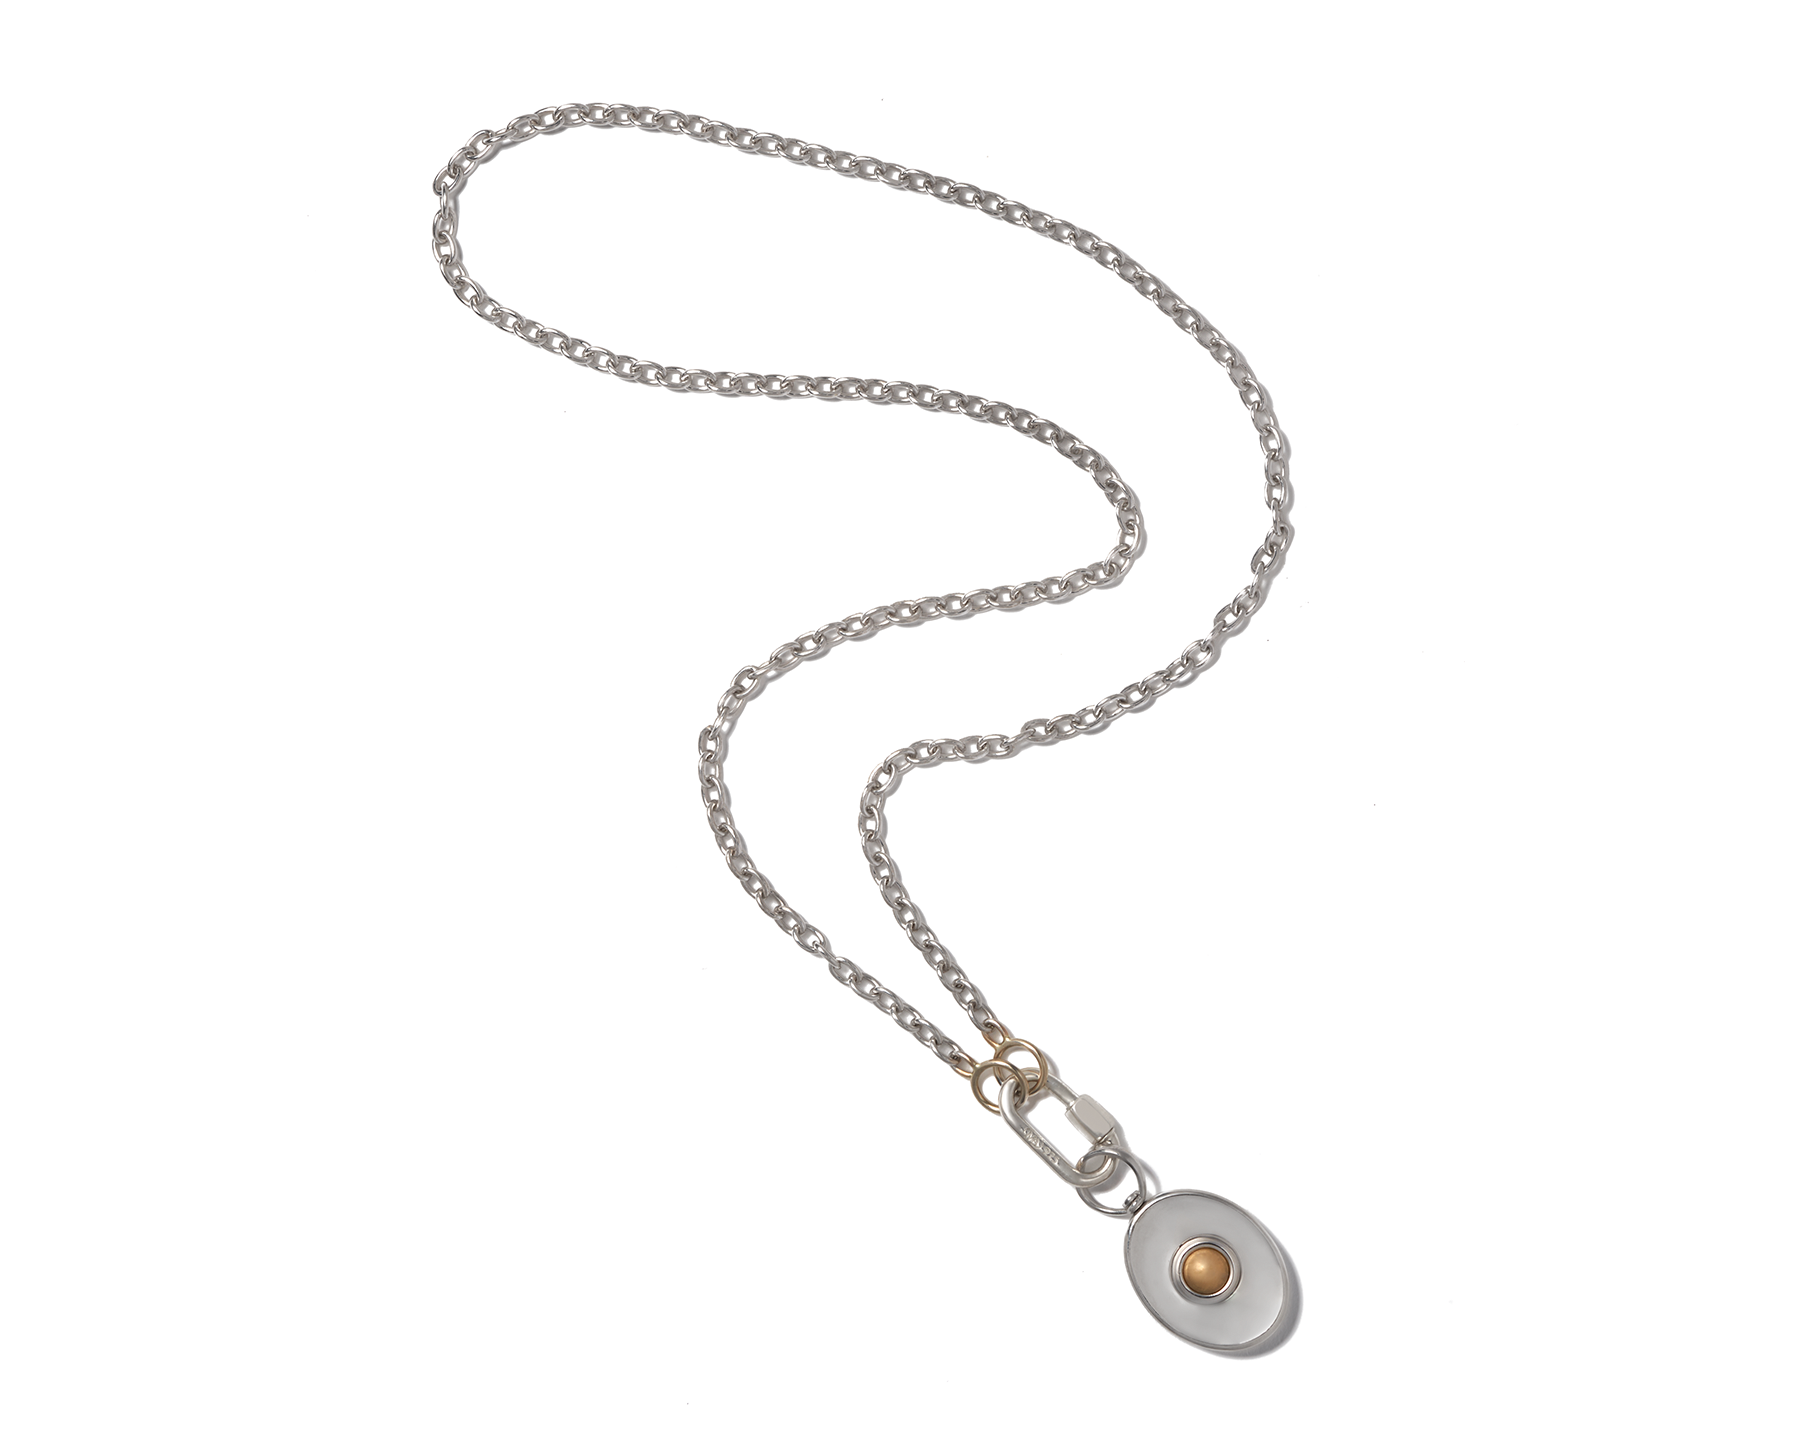 Gold Pulley Chain Necklace | Marla Aaron 14K White Gold / 16